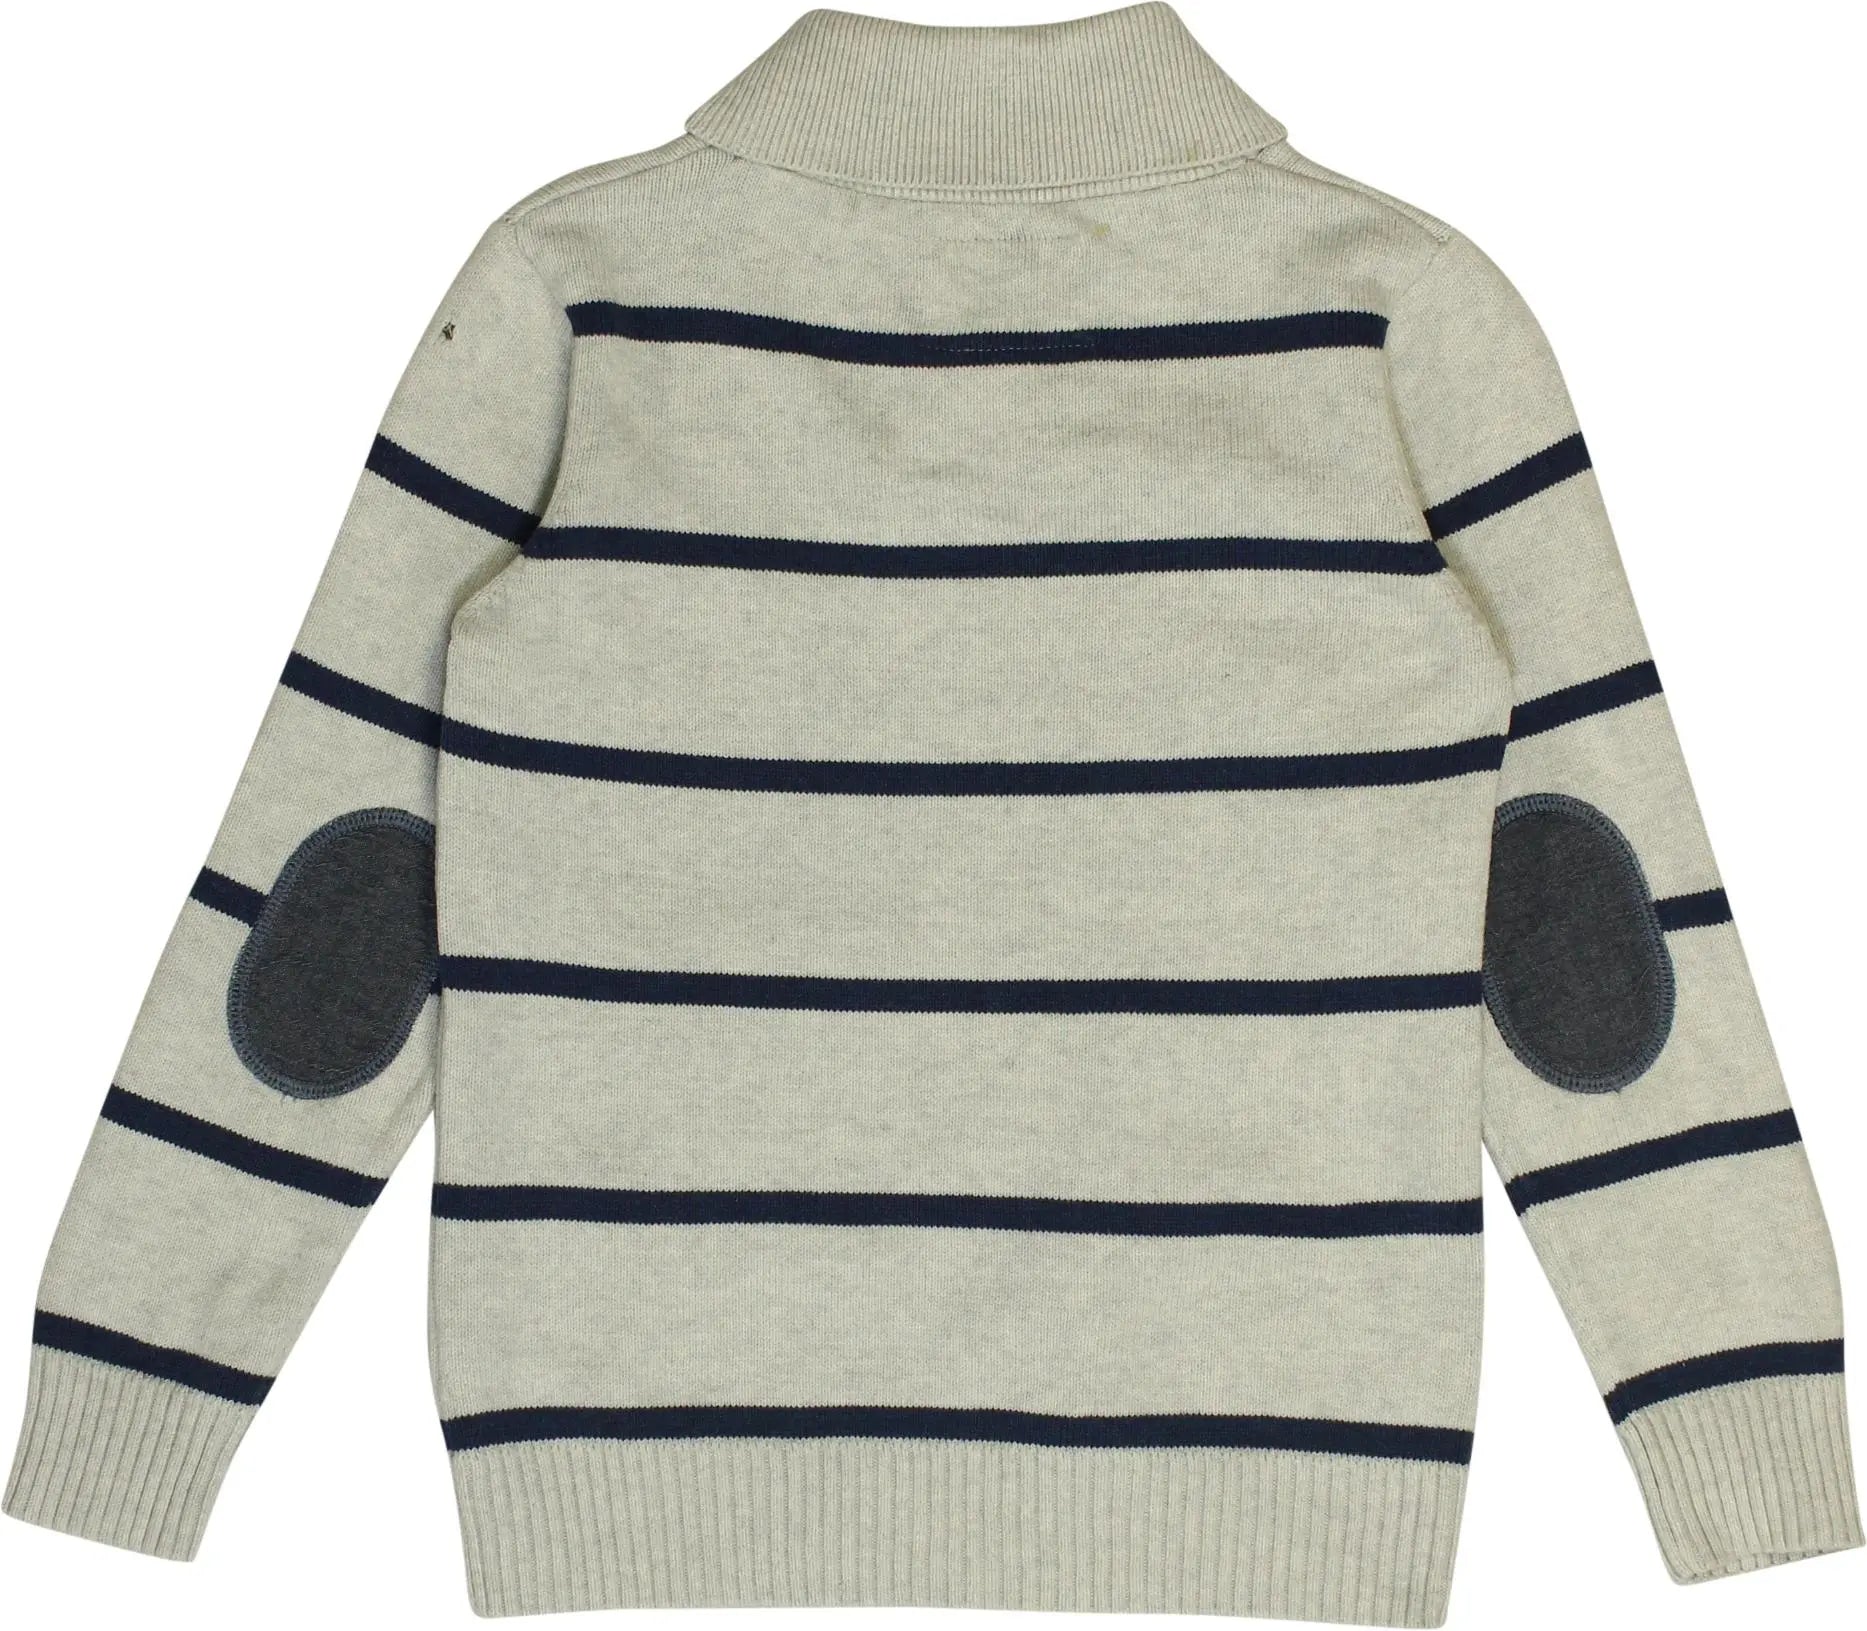 C&A - Grey Striped Jumper- ThriftTale.com - Vintage and second handclothing